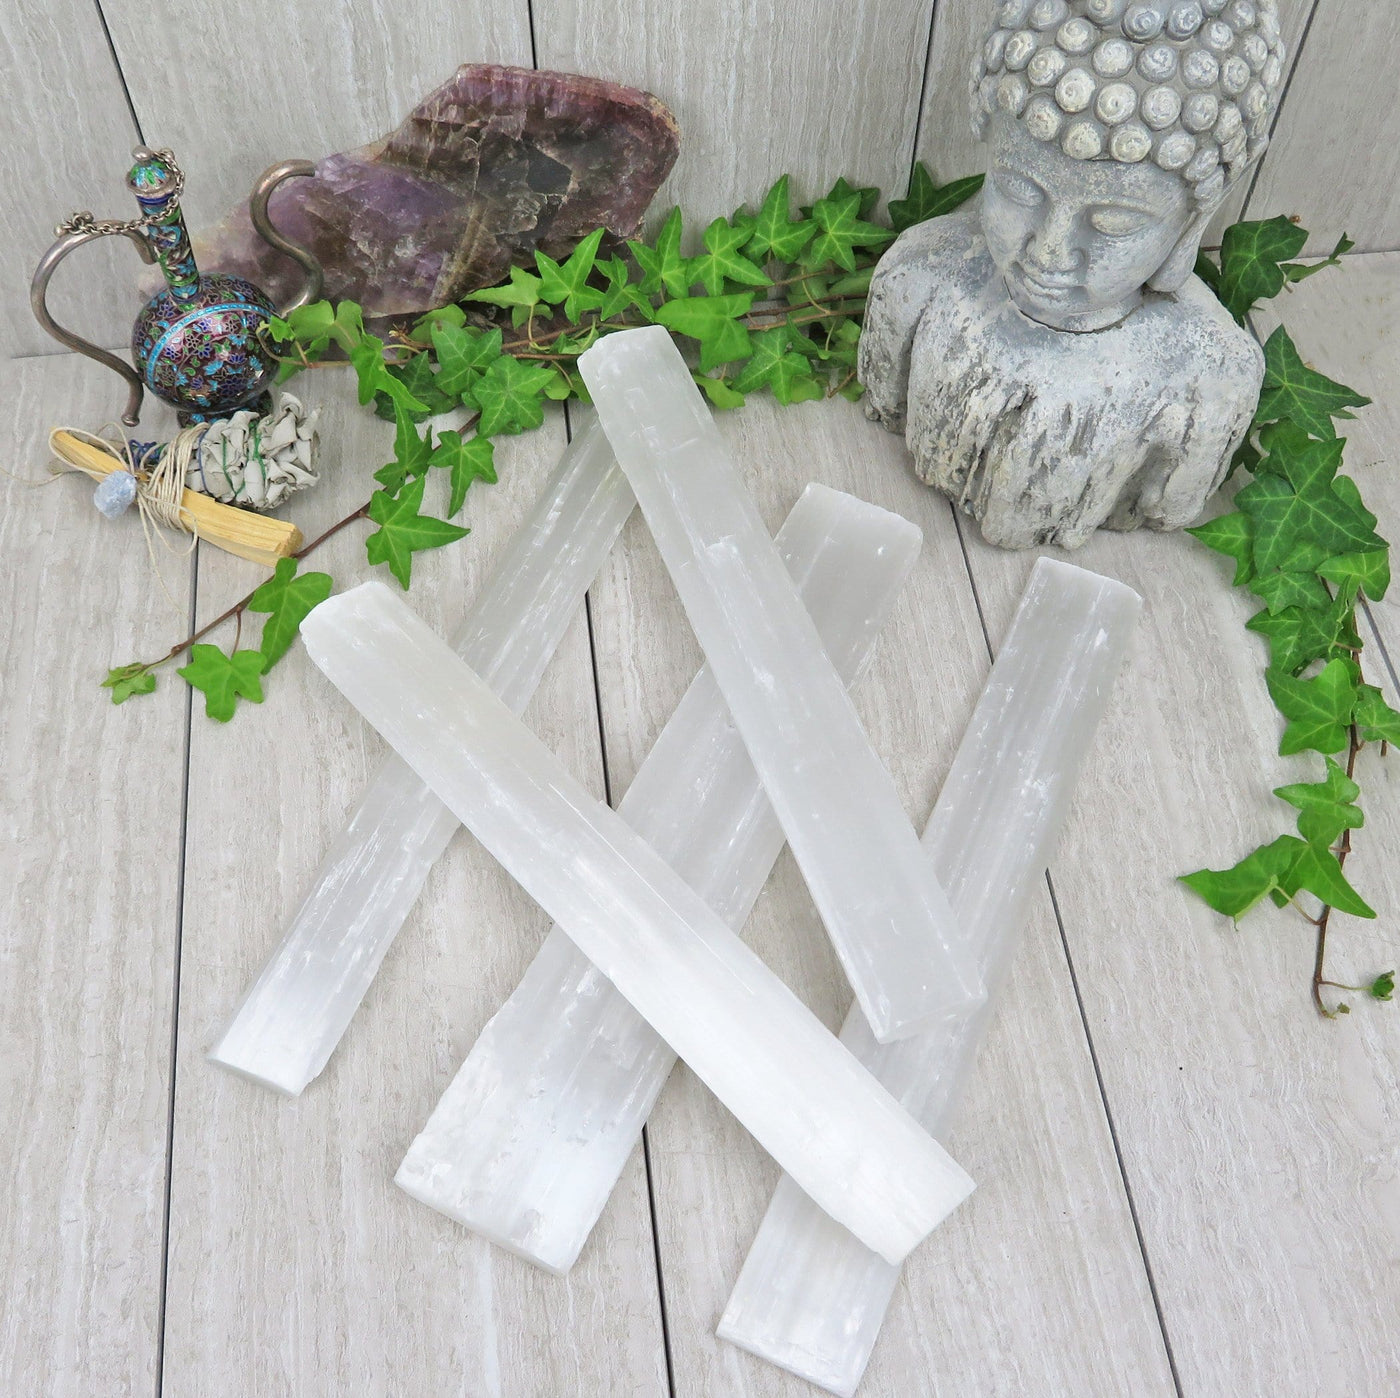 selenite bars on display for possible variations